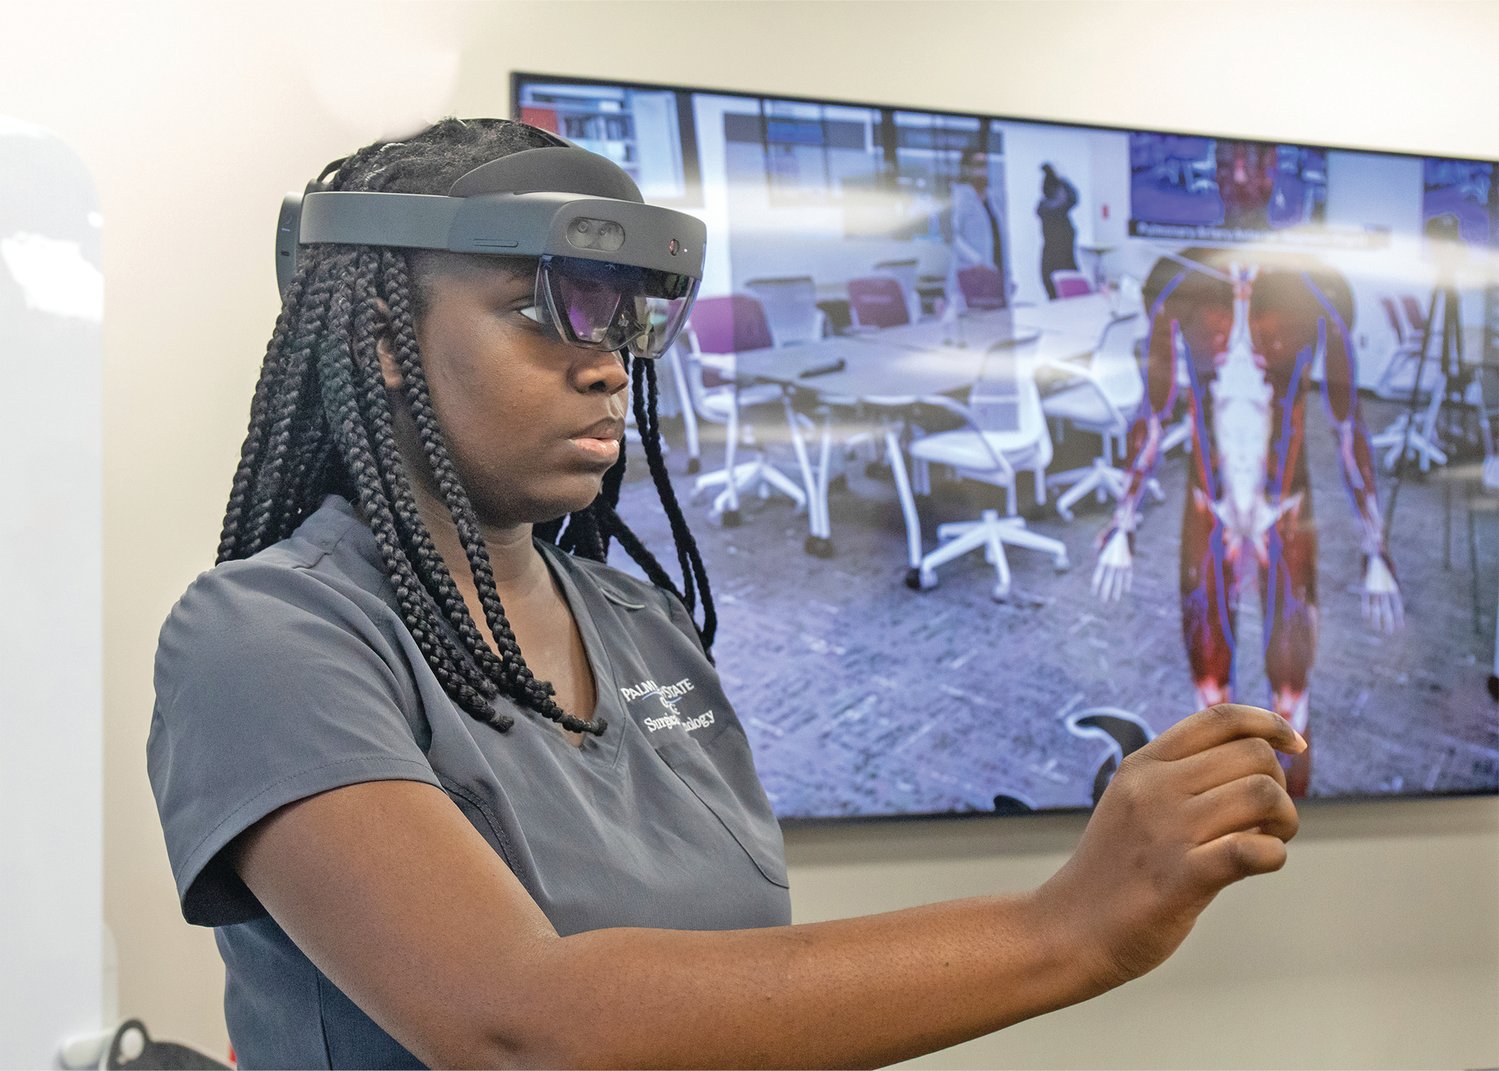 Surgical Services student Valendy Cadet demonstrates an augmented reality technology.